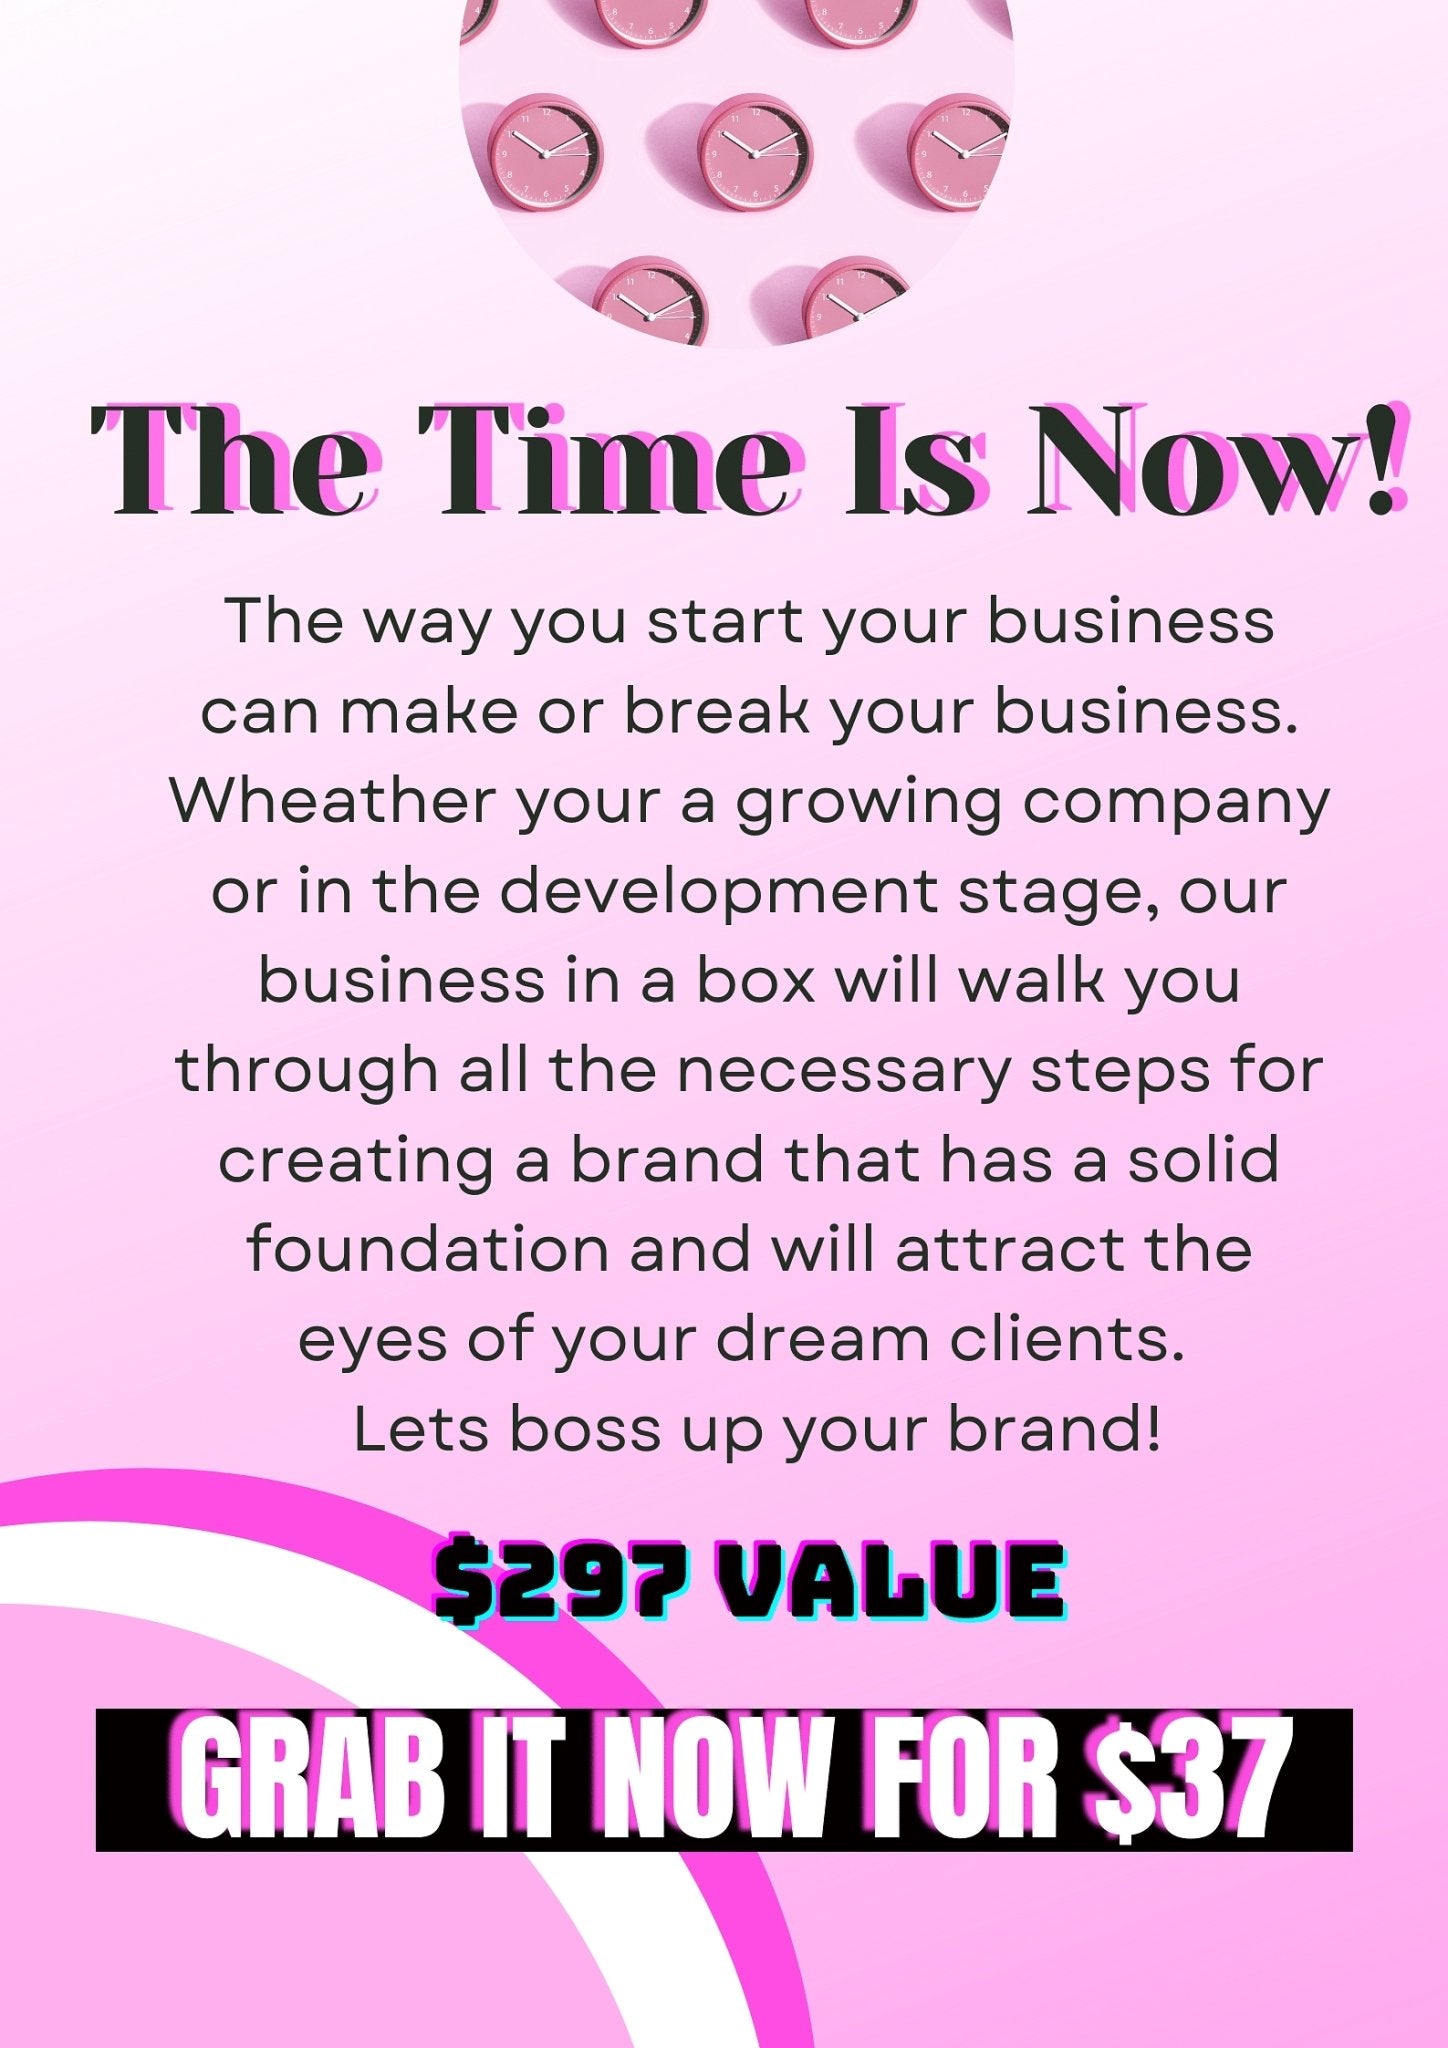 Business-In-A-Box: Starter Kit, Ebooks, Planners, Templates, Guides - Pink N White Factory